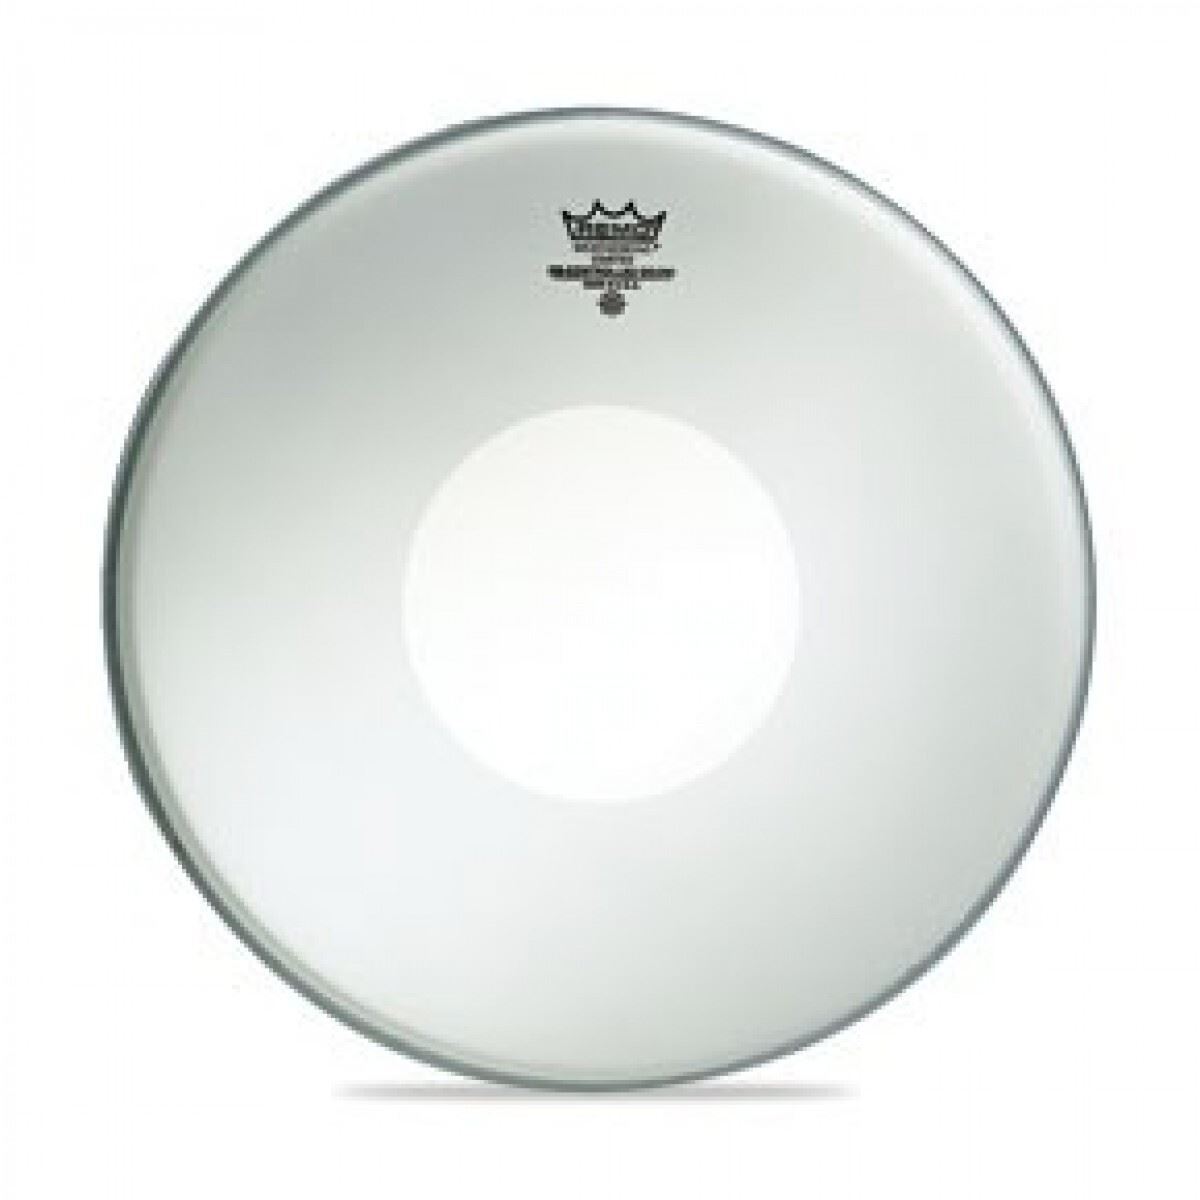 Remo CS-0114-00 Controlled Sound Drum Head Skin 14 inch Coated